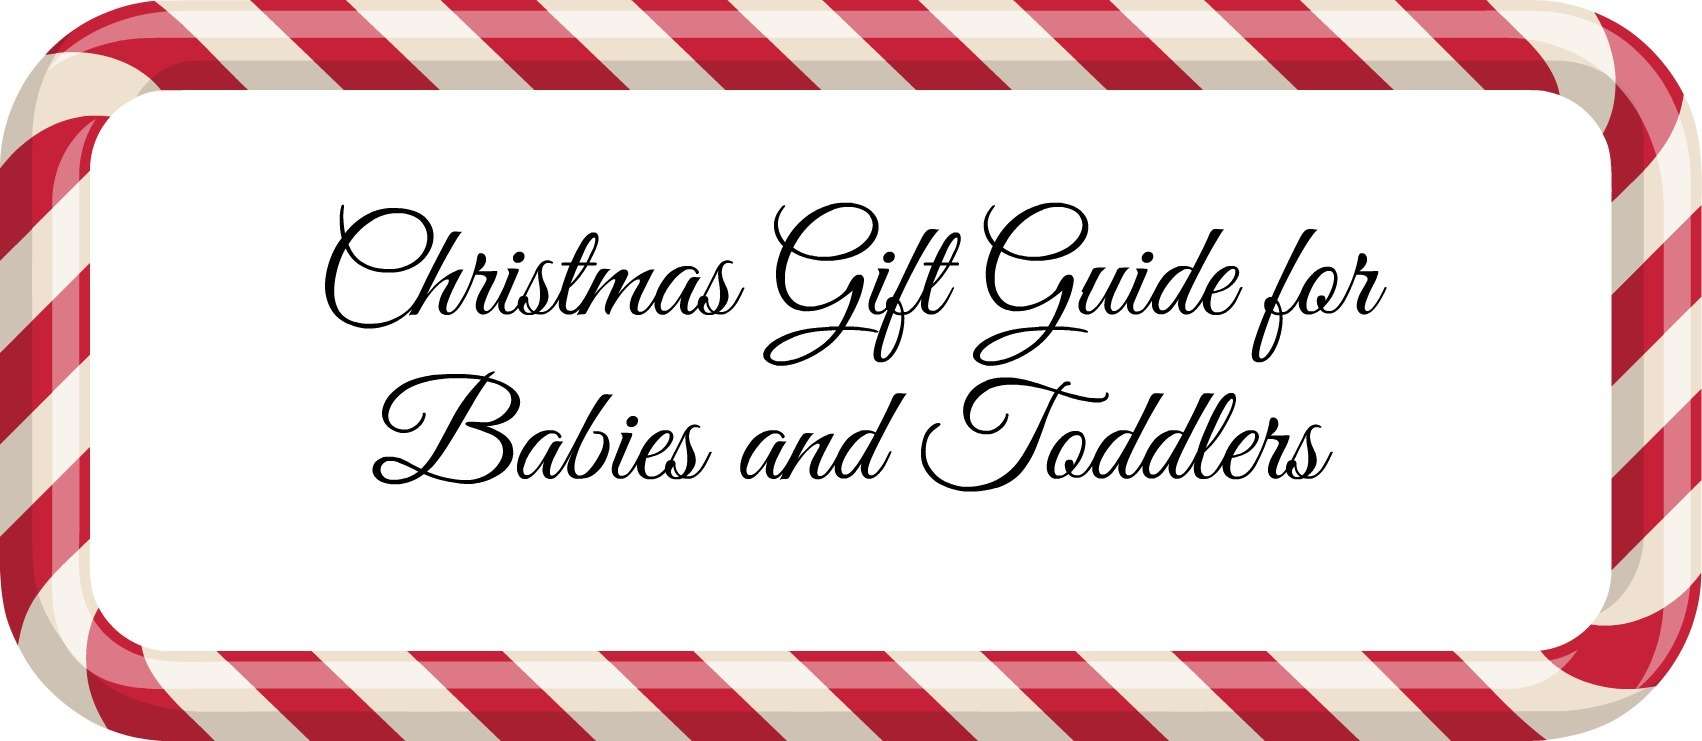 gift guide for babies and toddlers